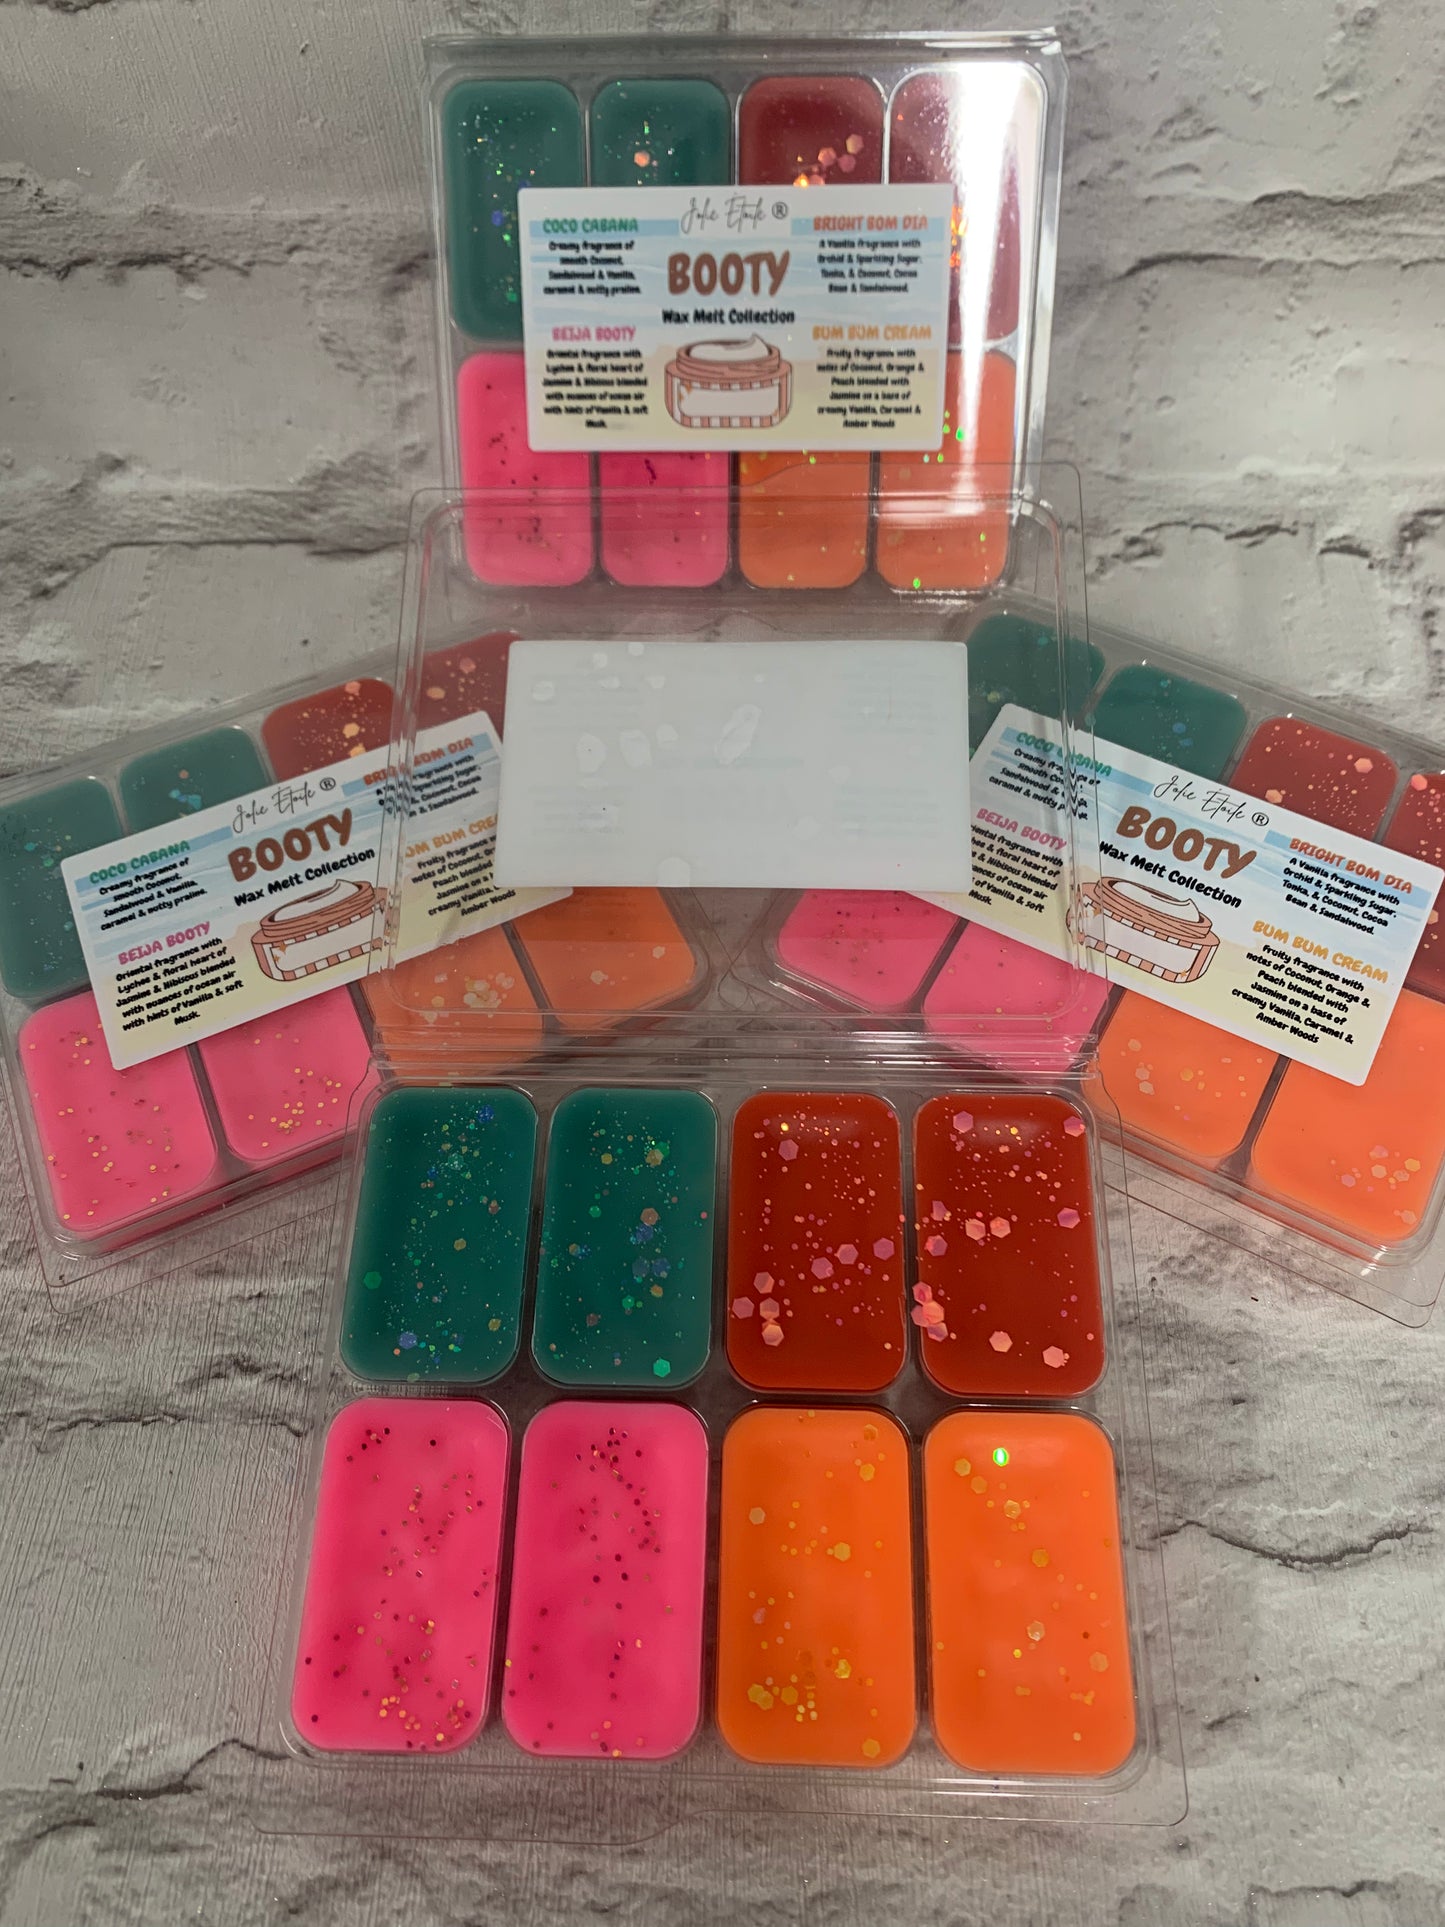 BOOTY Wax Melt Collection